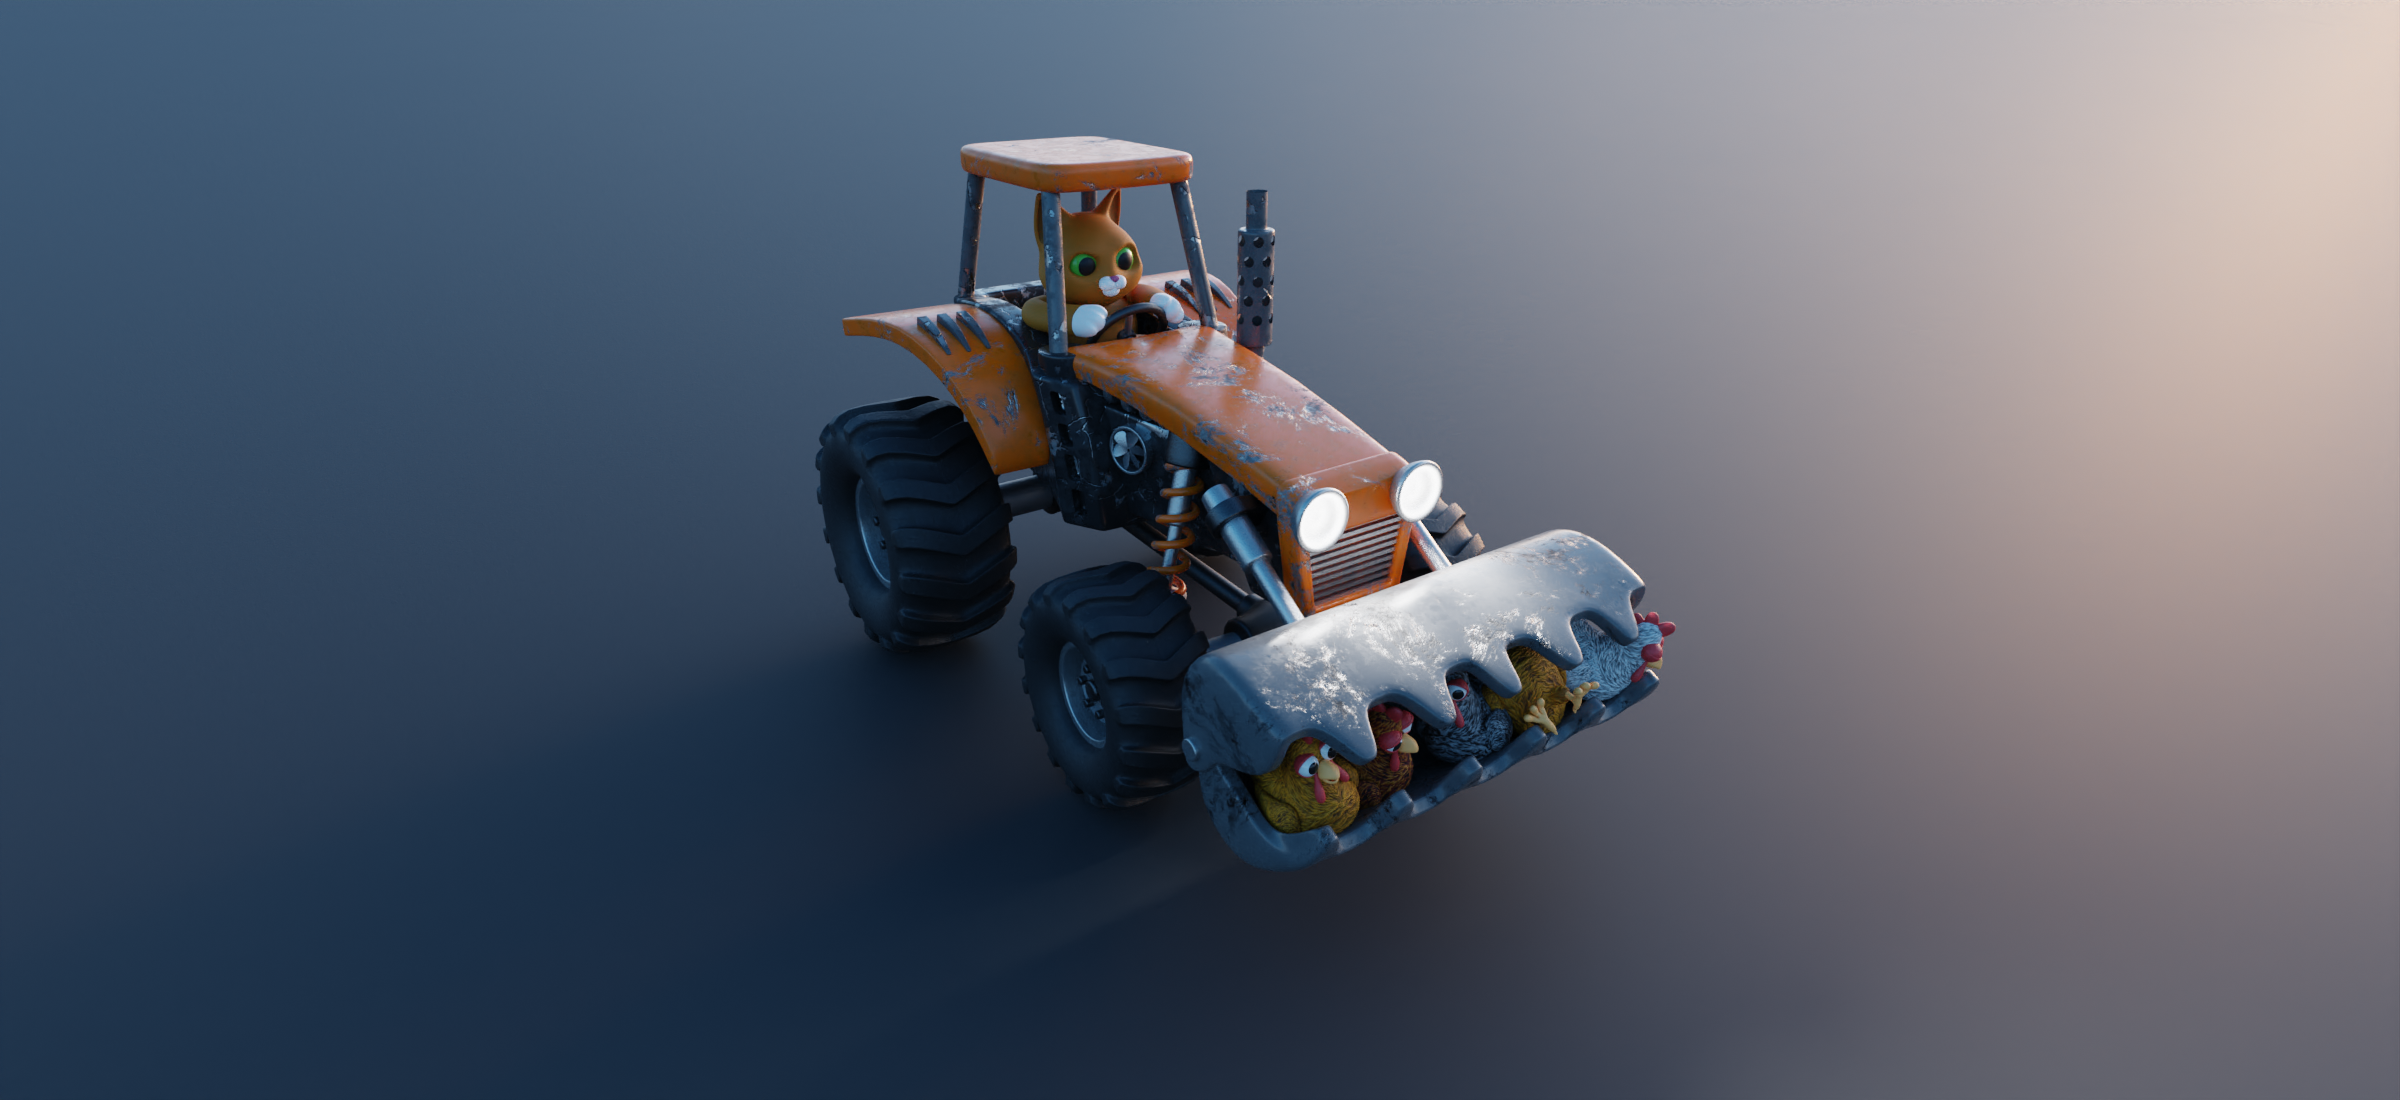 Chicken Catcher  Endless Engines Submission - Finished Projects - Blender  Artists Community